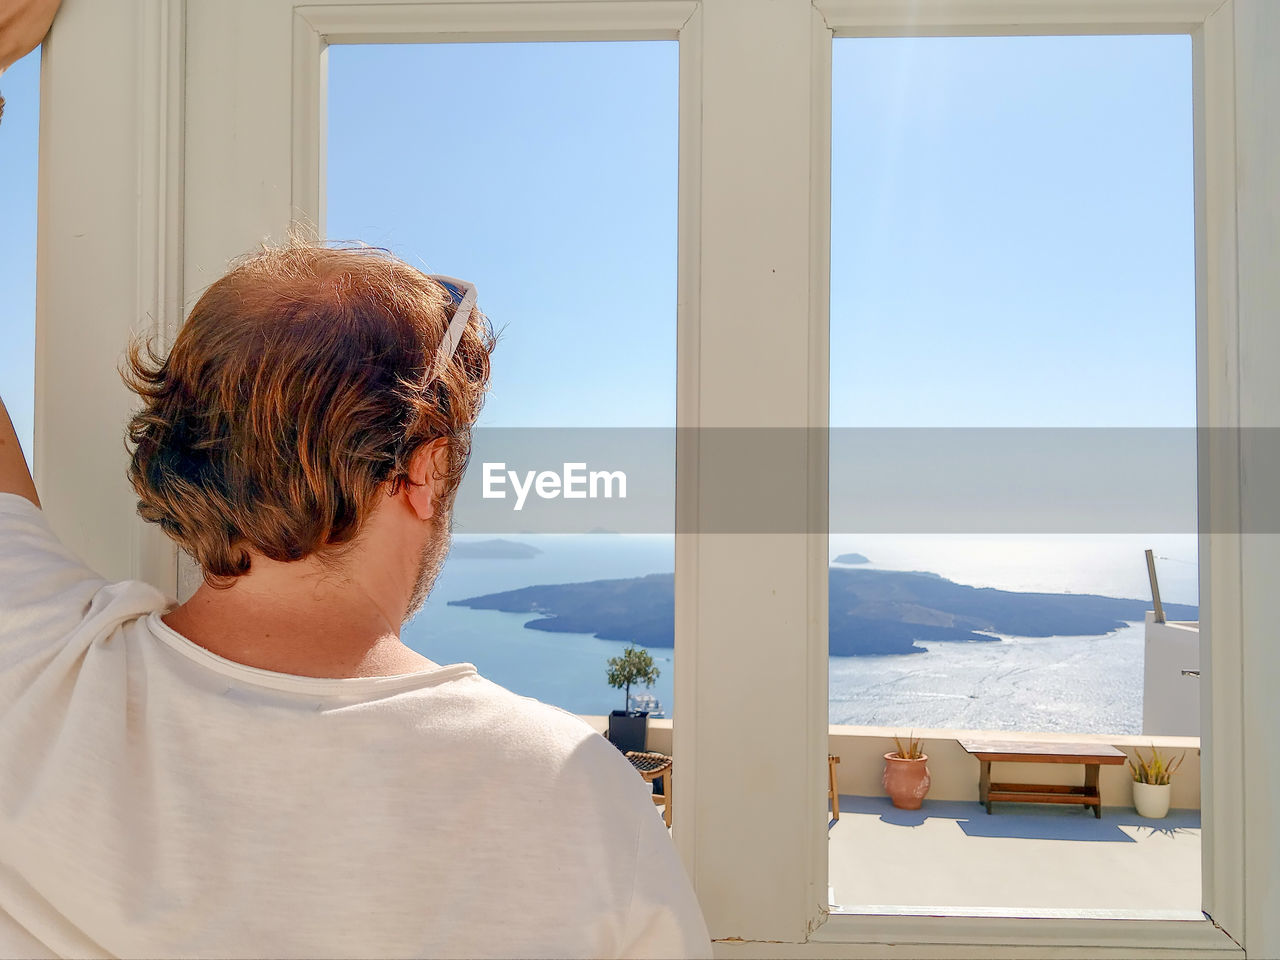 Rear view of man looking scenic view through window